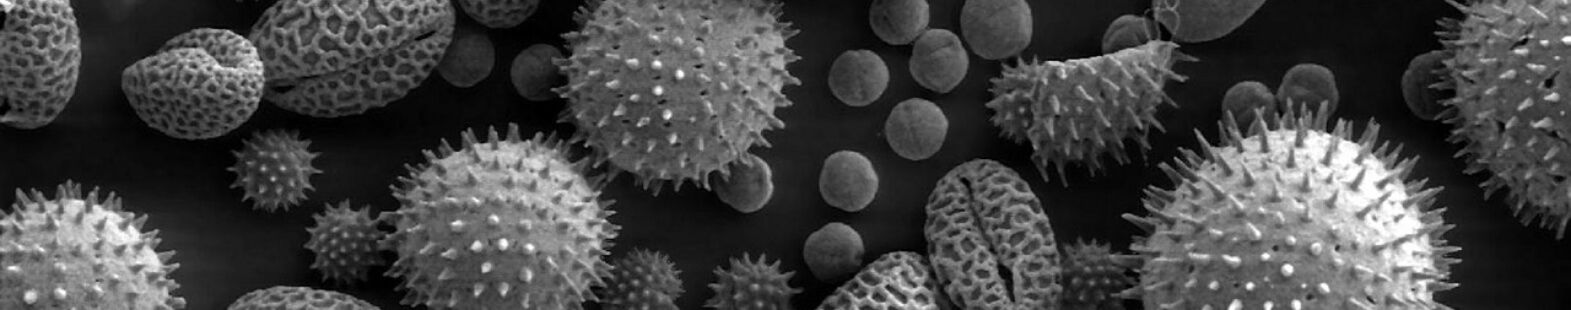 Microscopic image of different kinds of pollen. Some are small and round, others are larger and with spikes.